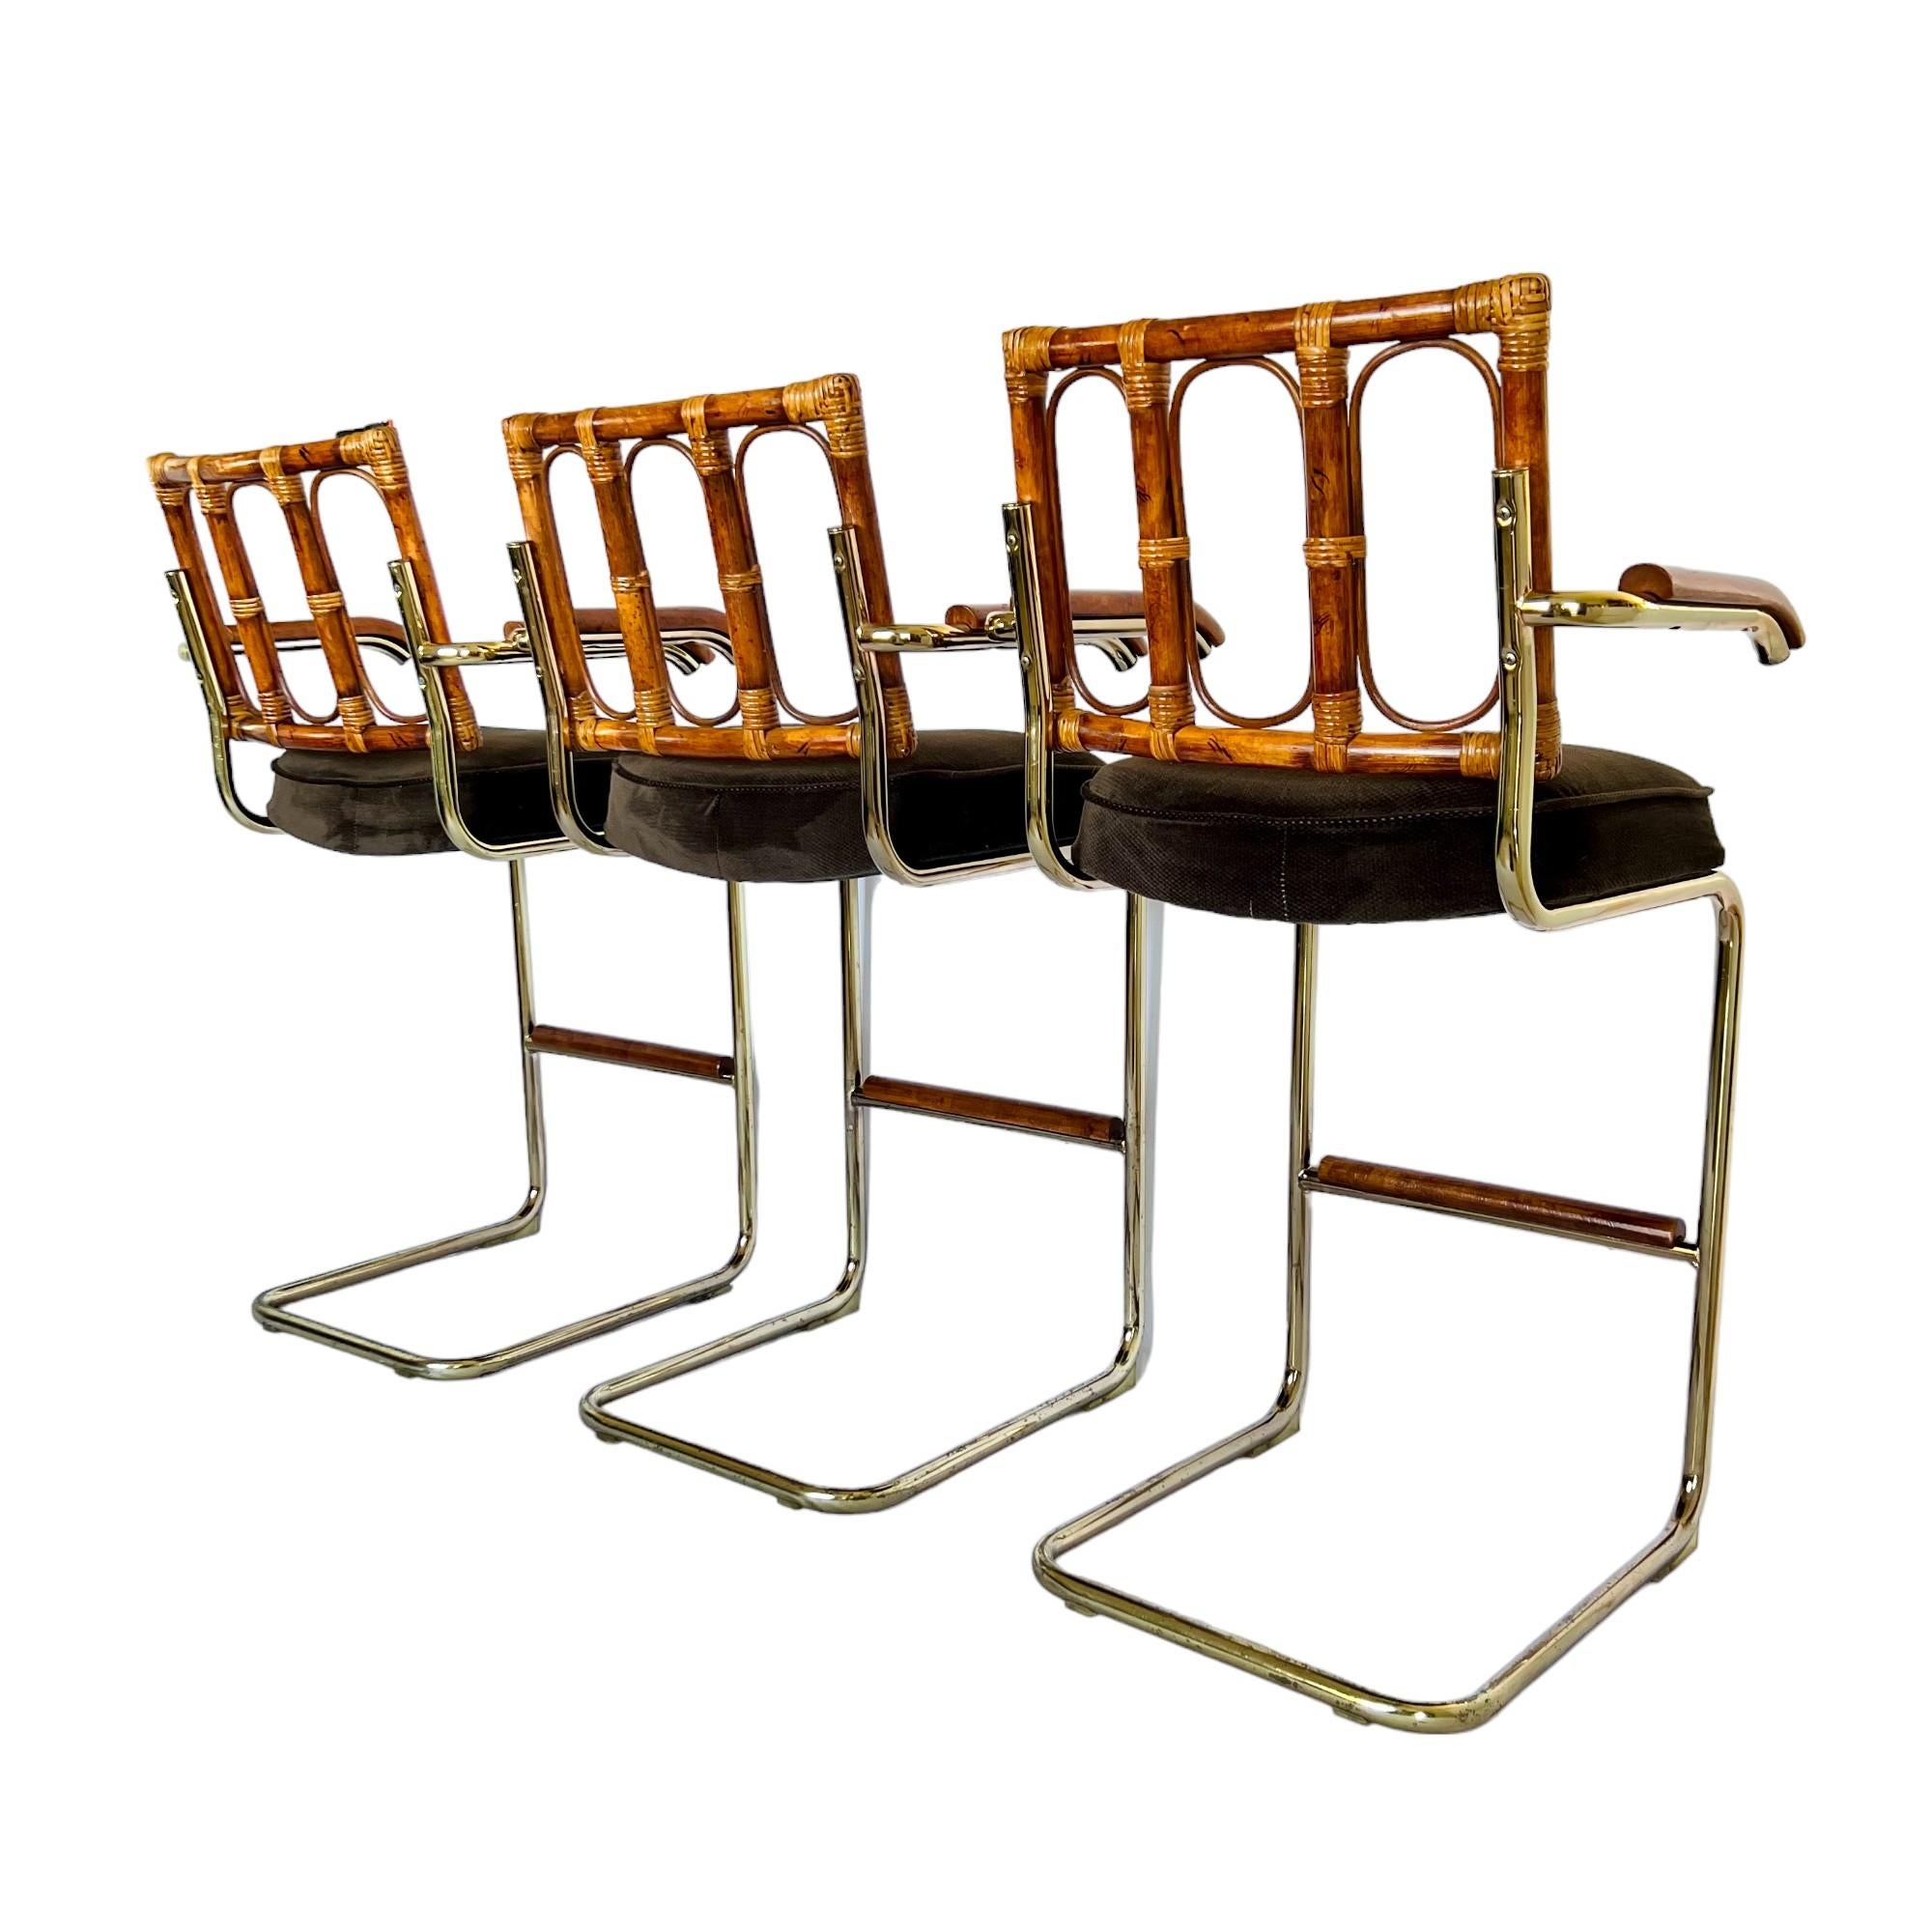 Mid-Century Modern Rattan and Tubular Brass Cantilever Bar Stools, Set of 3 In Good Condition For Sale In Harlingen, TX